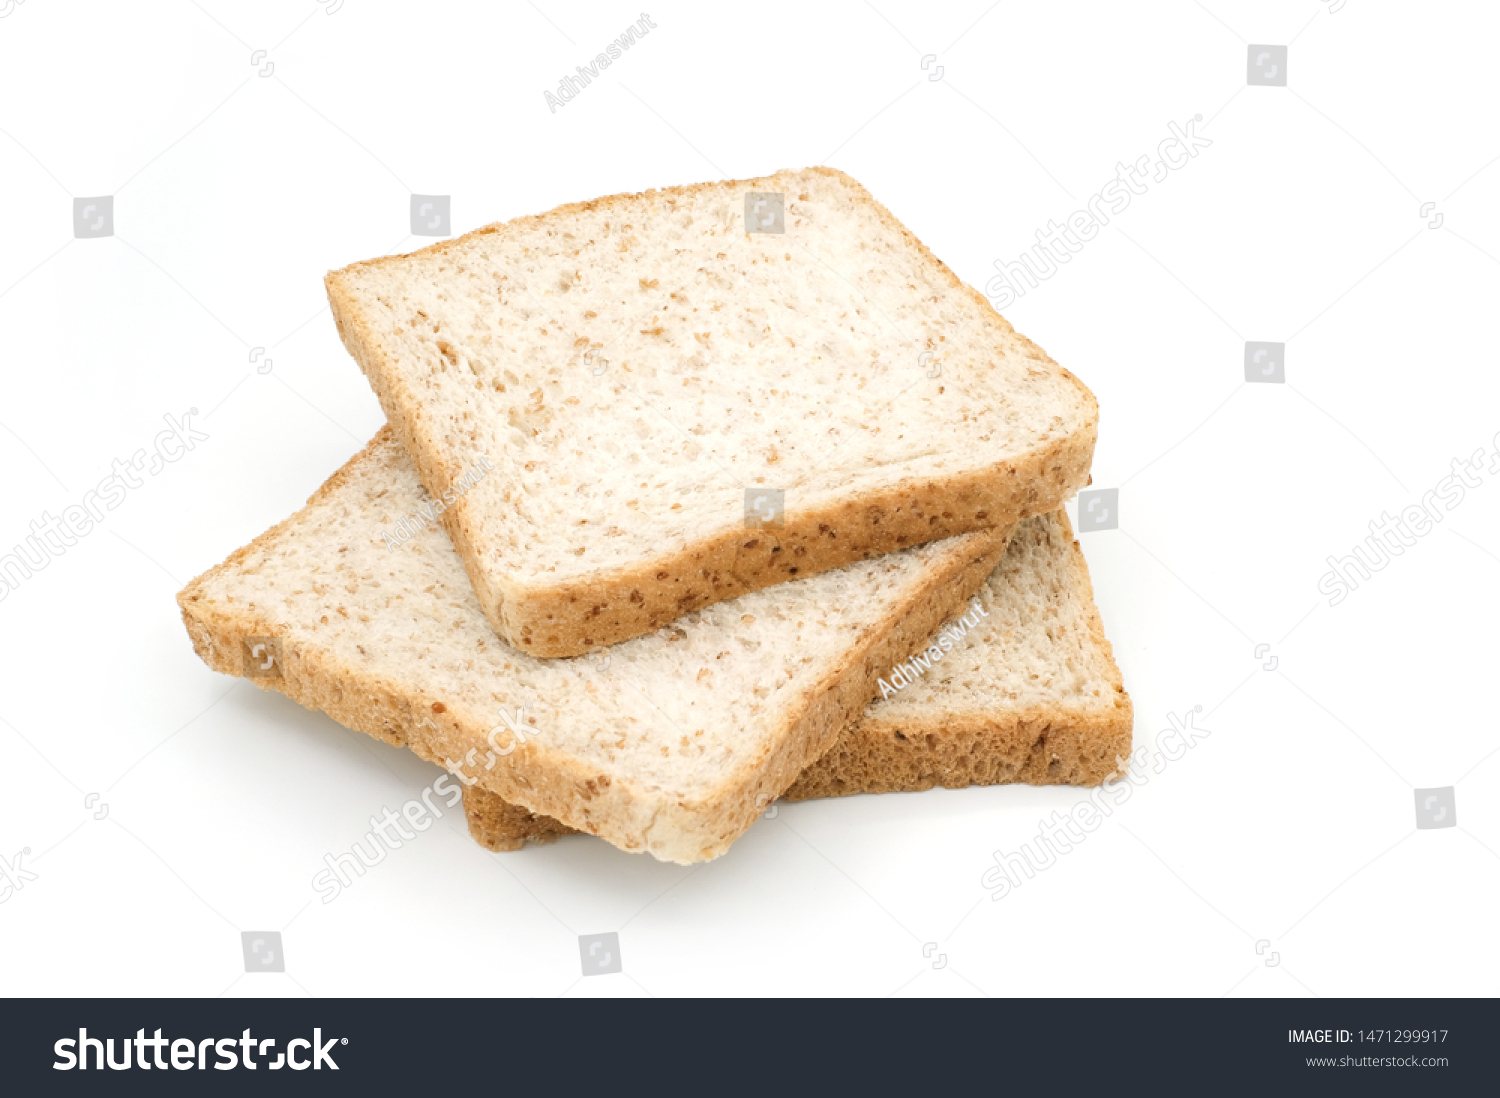 Whole Grain Bread isolated on white background, Breakfast with whole Grain Bread, Closeup whole grain bread #1471299917